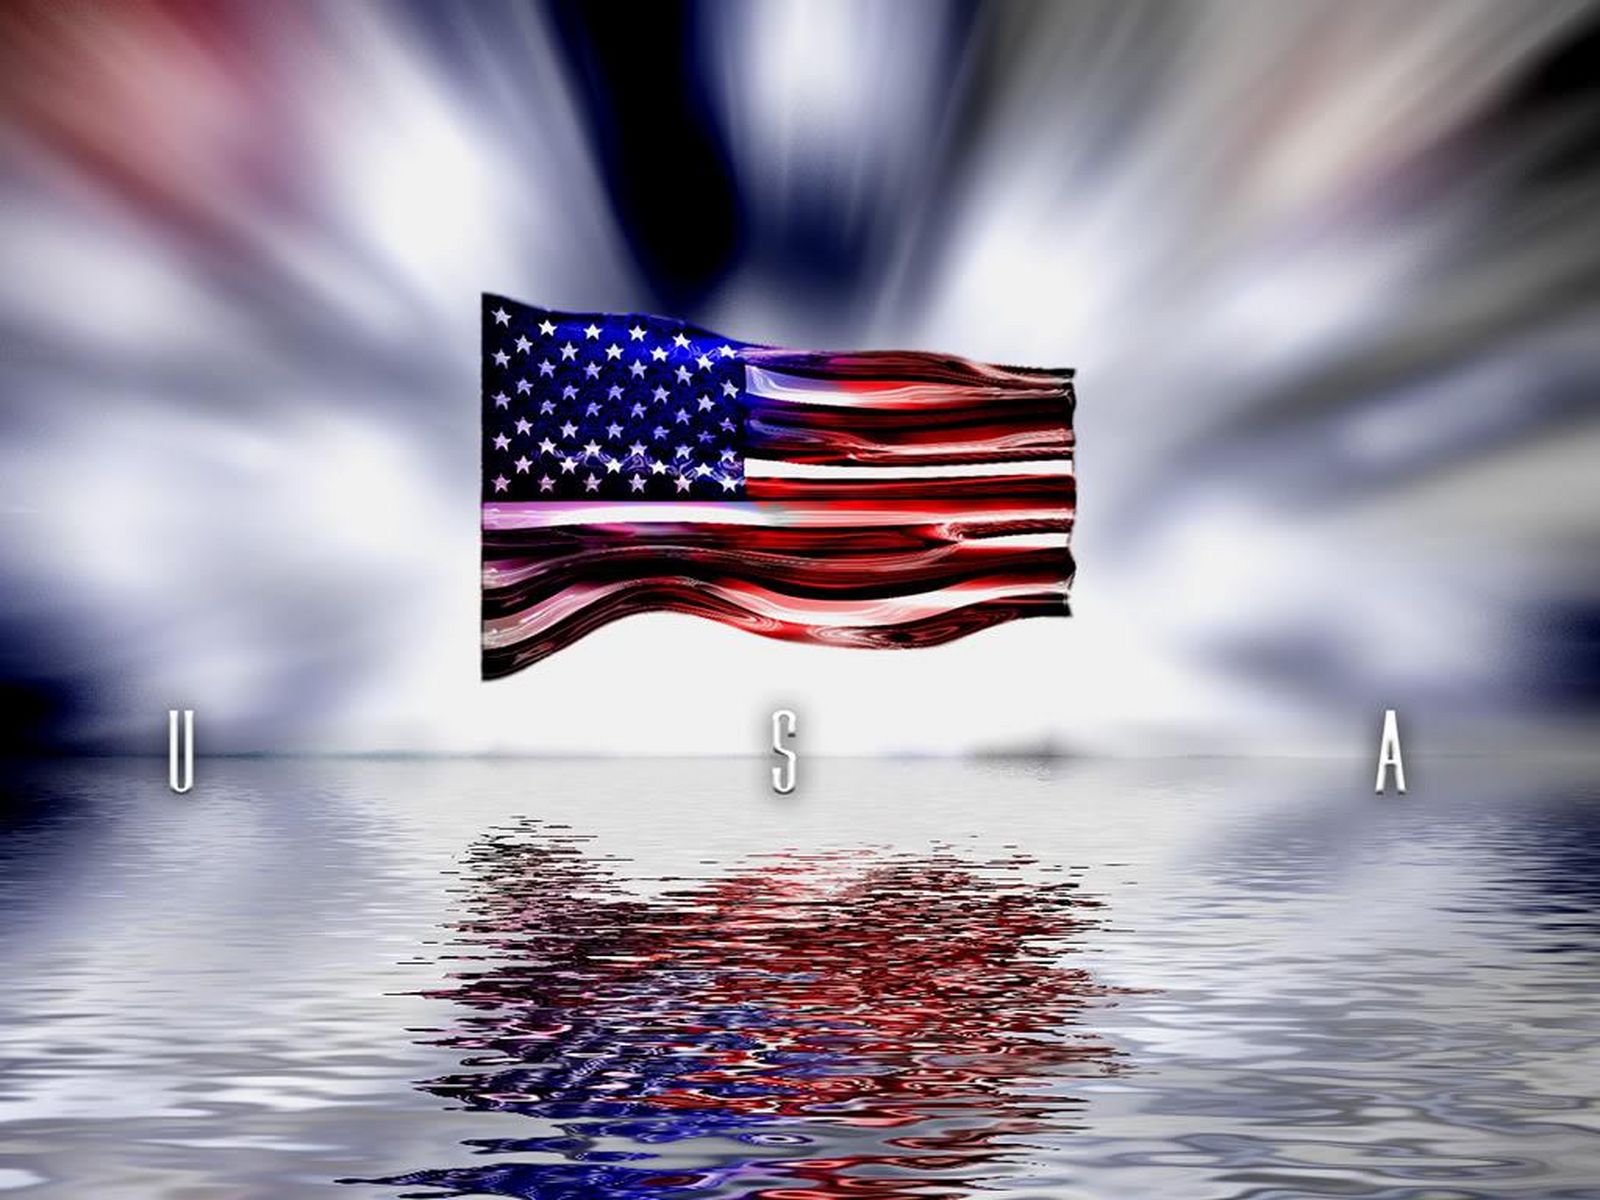 USA United States of America Flag Wallpaper Background Image 1600x1200